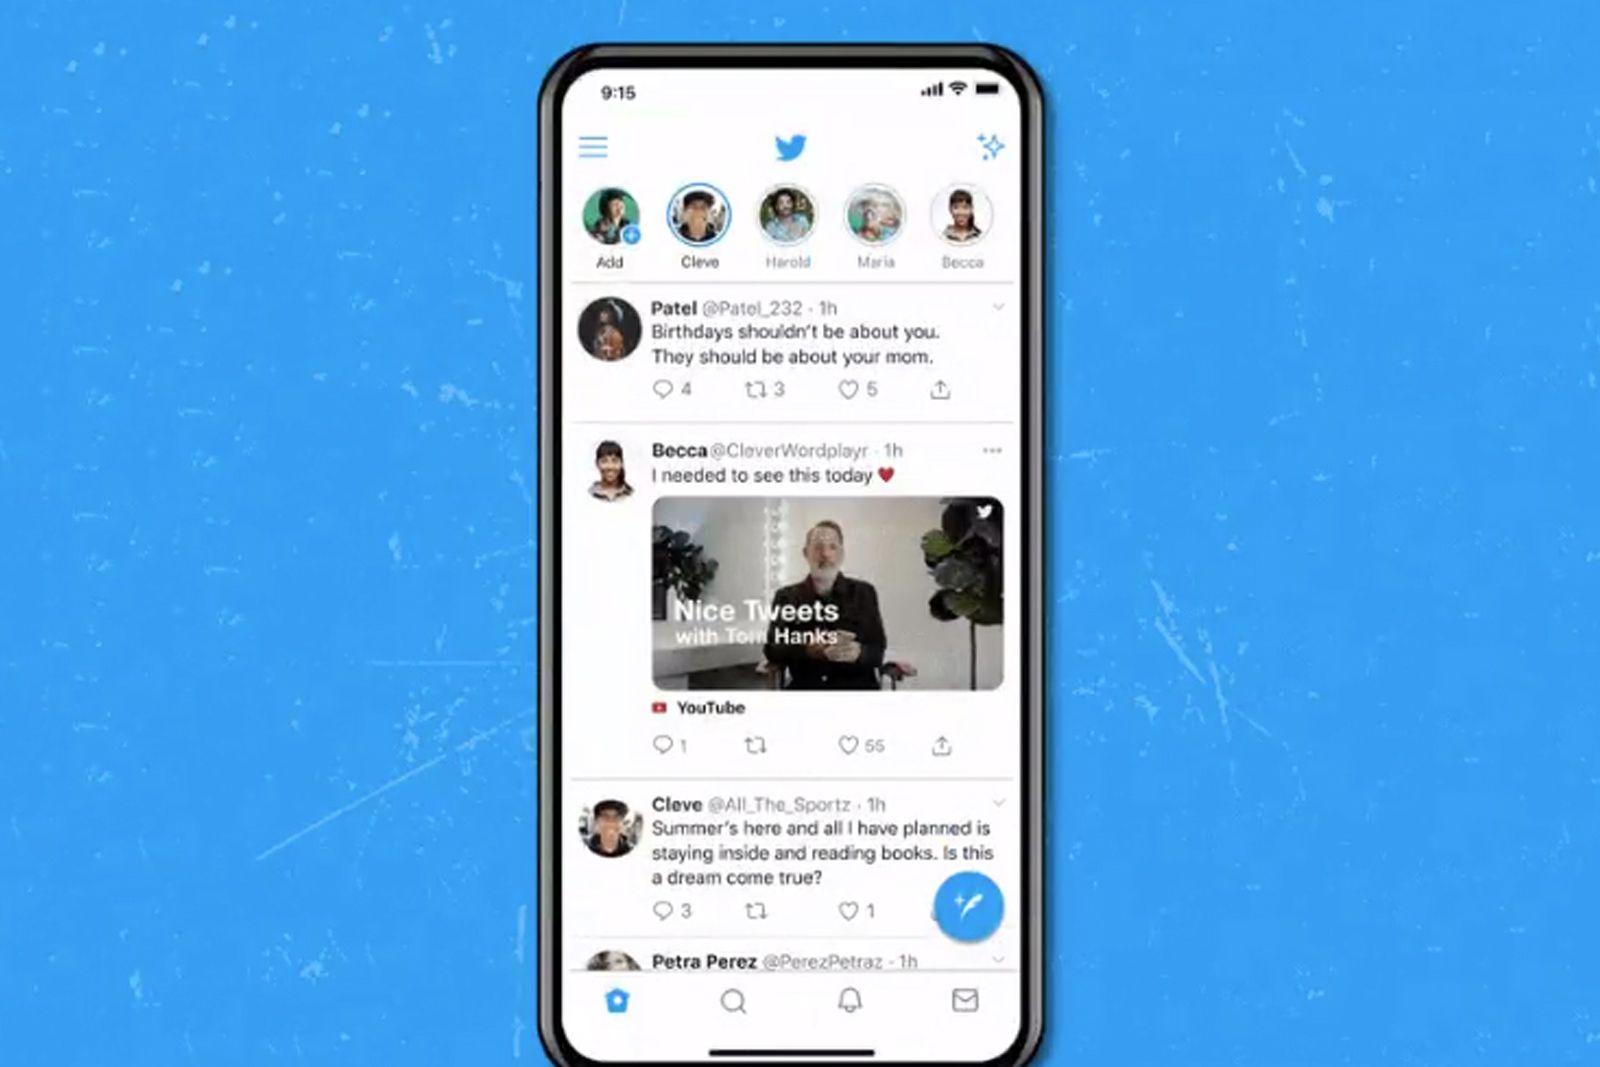 Twitter tests the ability to watch YouTube videos without leaving the app